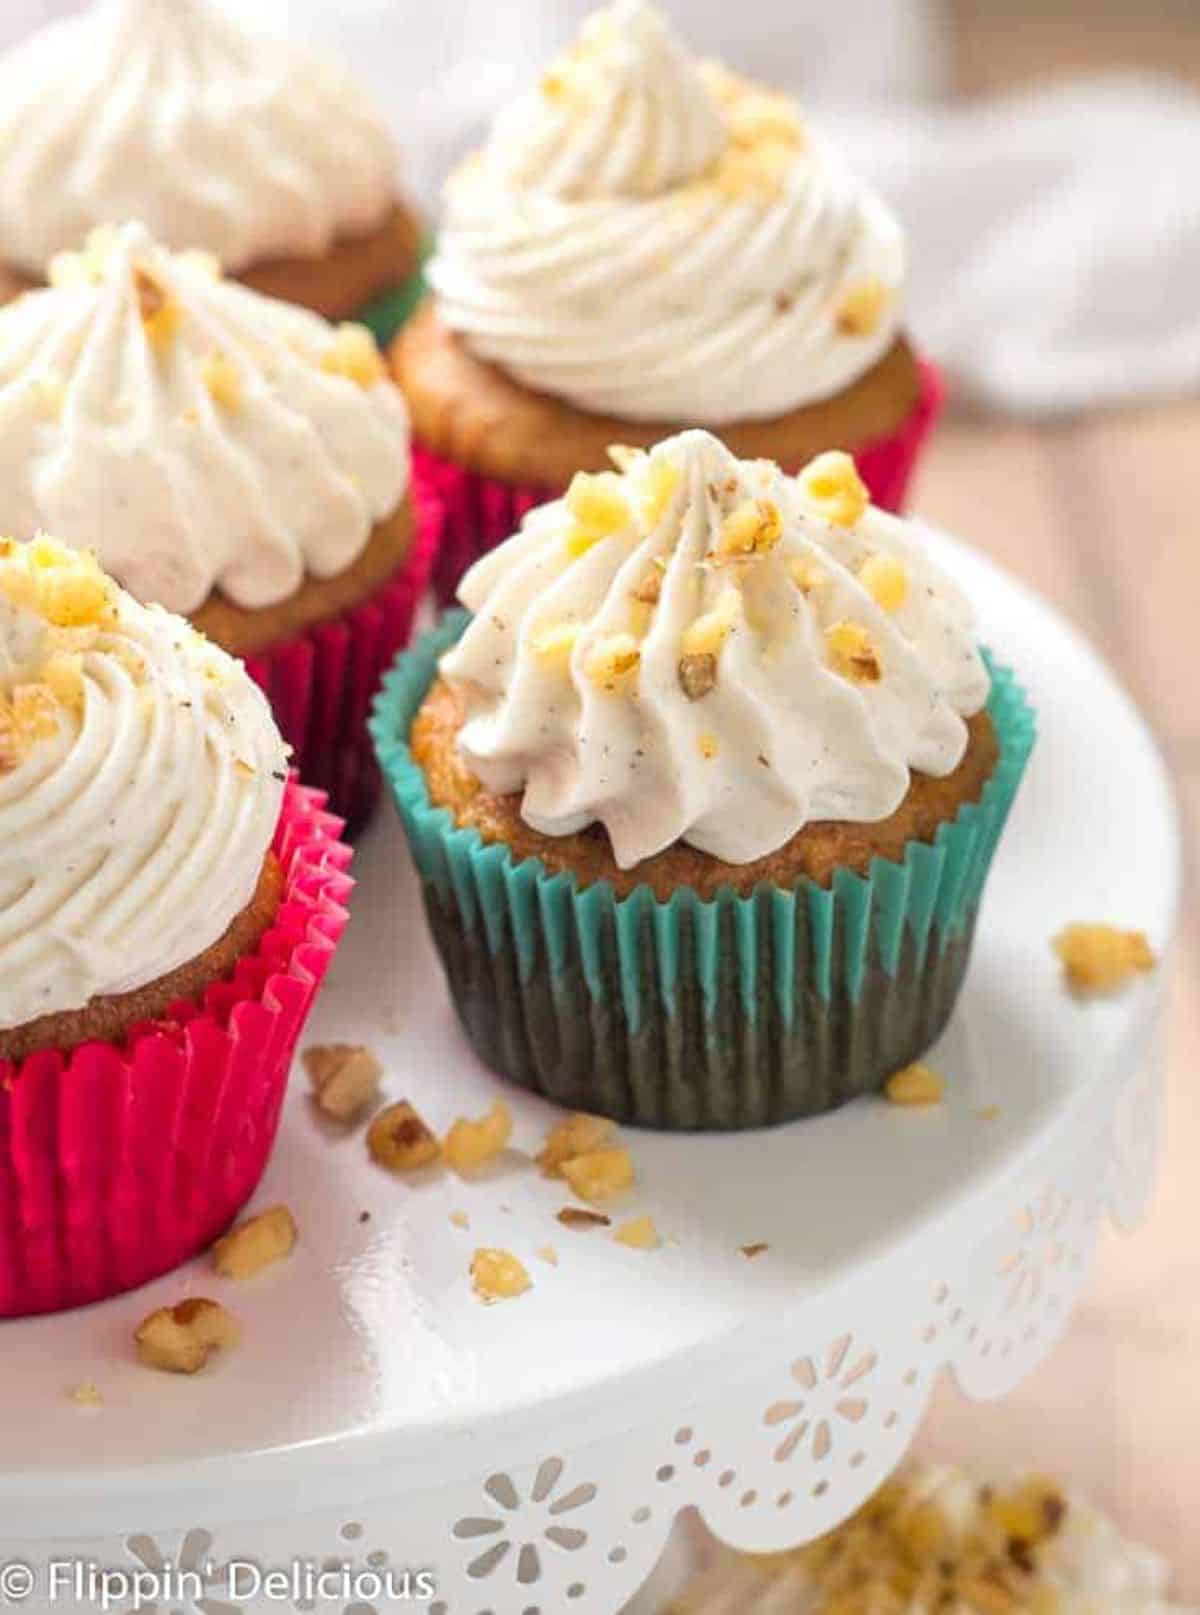 Delicious Gluten-Free Carrot Cake Cupcakes on a cake tray.